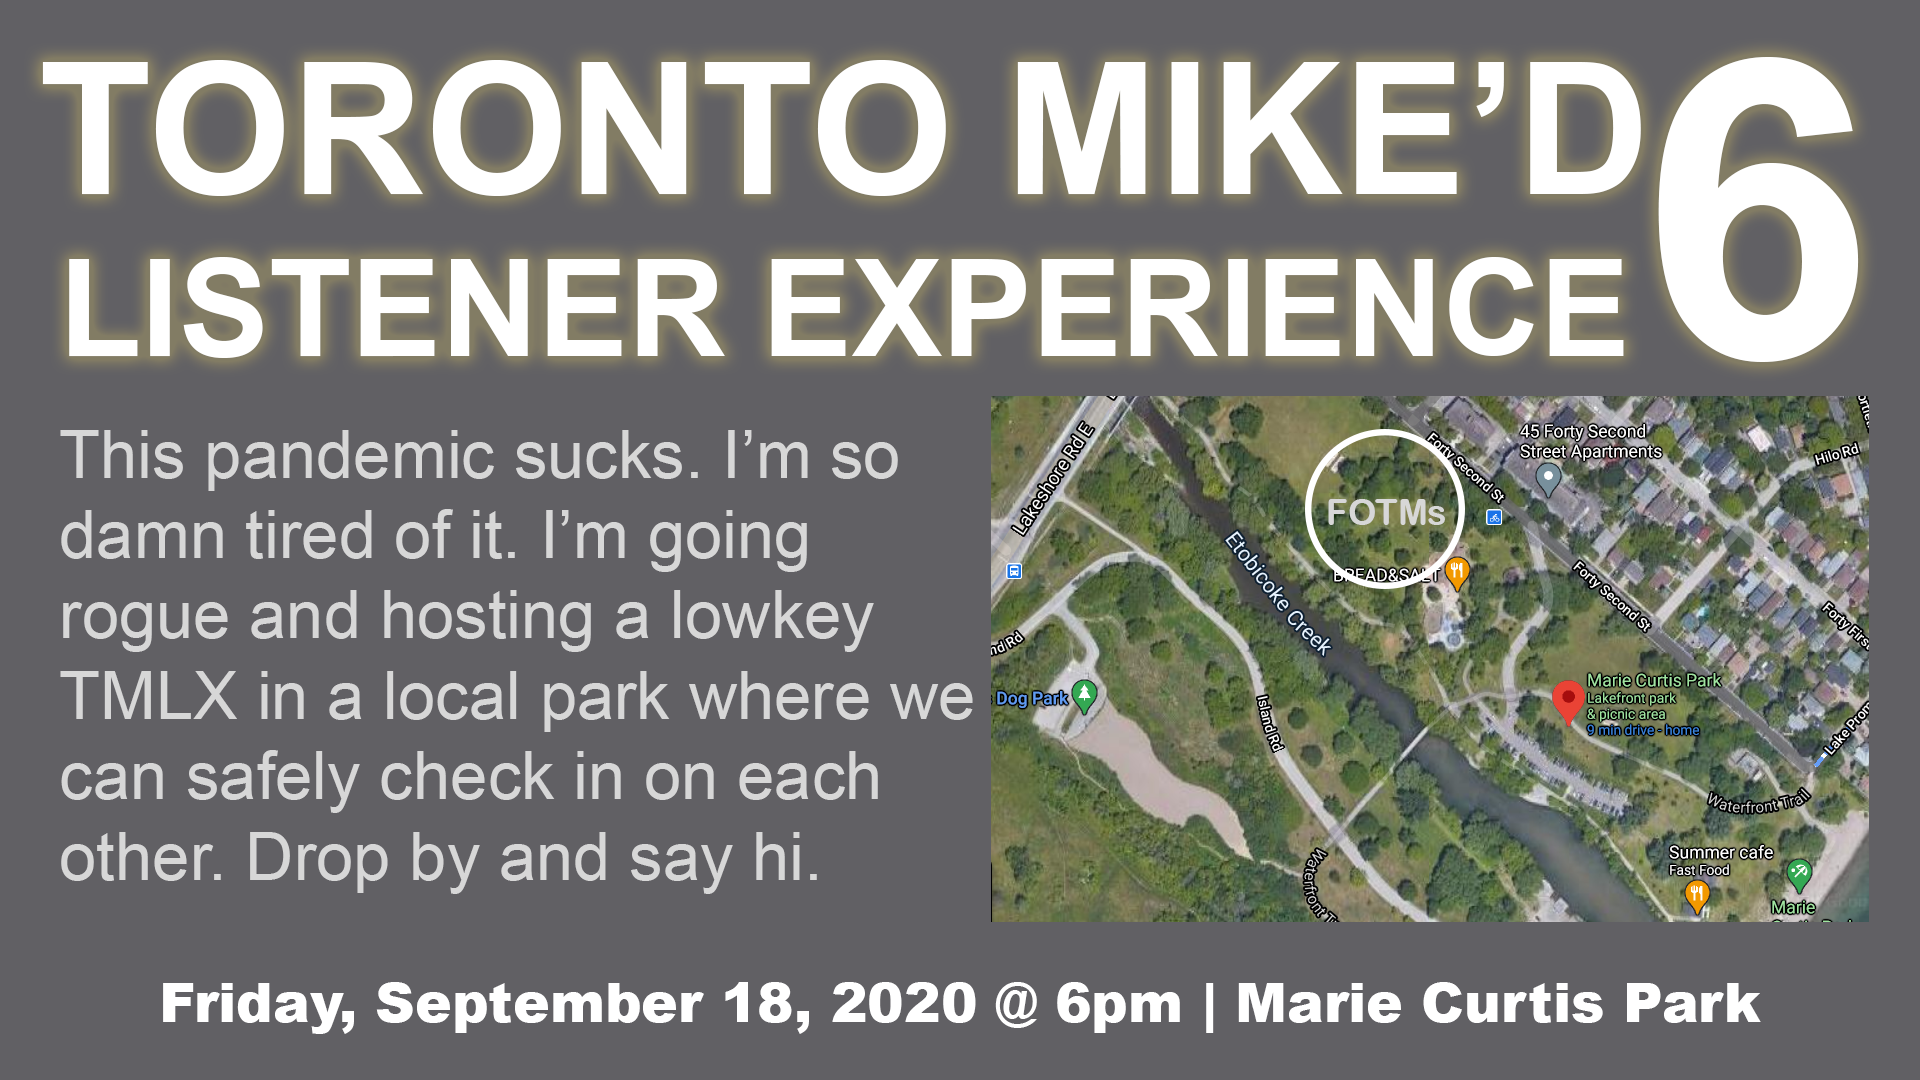 TMLX6 is September 18 at 6pm at Marie Curtis Park